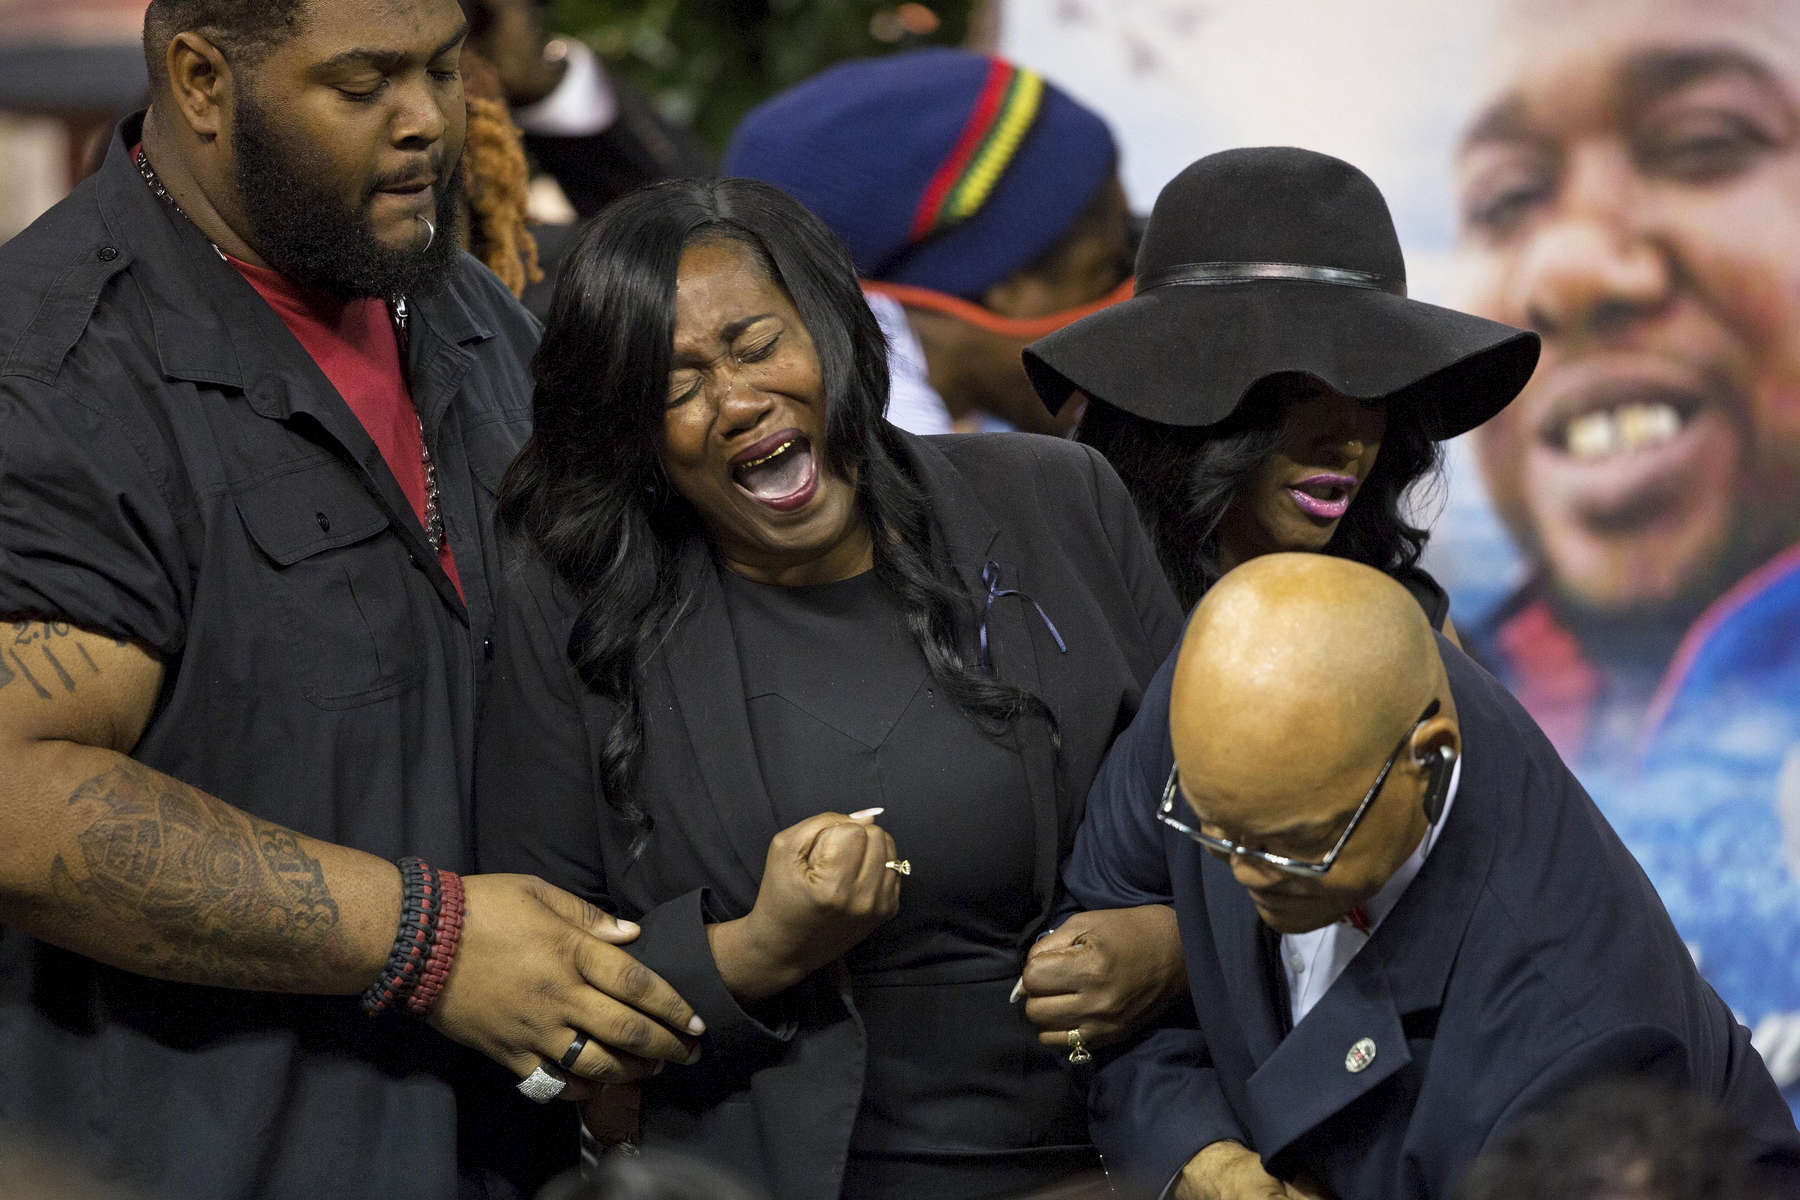 Sandra Sterling, the aunt of Alton Sterling, a black CD seller captured on video being shot and killed by a white police officer on July 5th, cries out after viewing his body at the F.G. Clark Activity Center in Baton Rouge, La. USA, Friday, July 15, 2016. Rev. Al Sharpton, who spoke at the roughly three hour service, called for more accountability for police officers who kill African-Americans and reeled off a list of high-profile police shootings that have angered many in the black community: {quote}We have an inferior judicial system that does not protect all of its citizens equally.{quote} (AP Photo/Max Becherer)